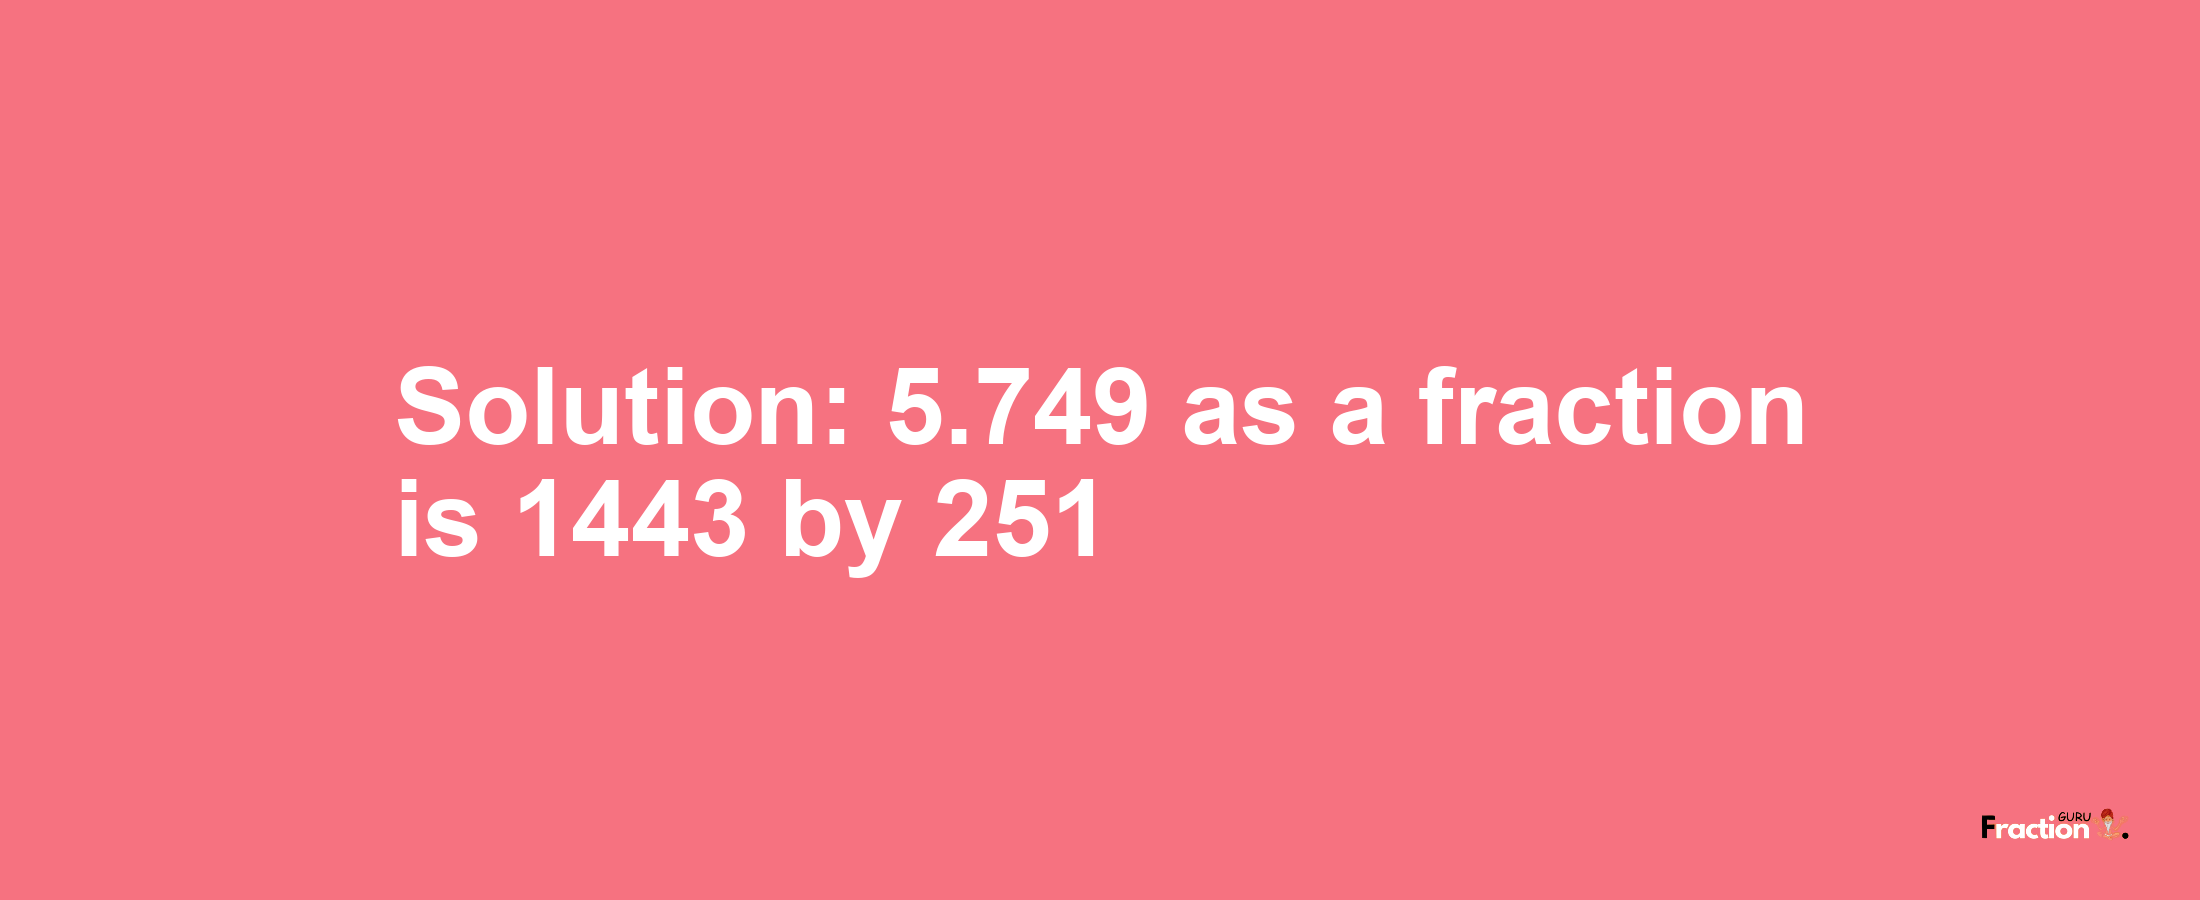 Solution:5.749 as a fraction is 1443/251